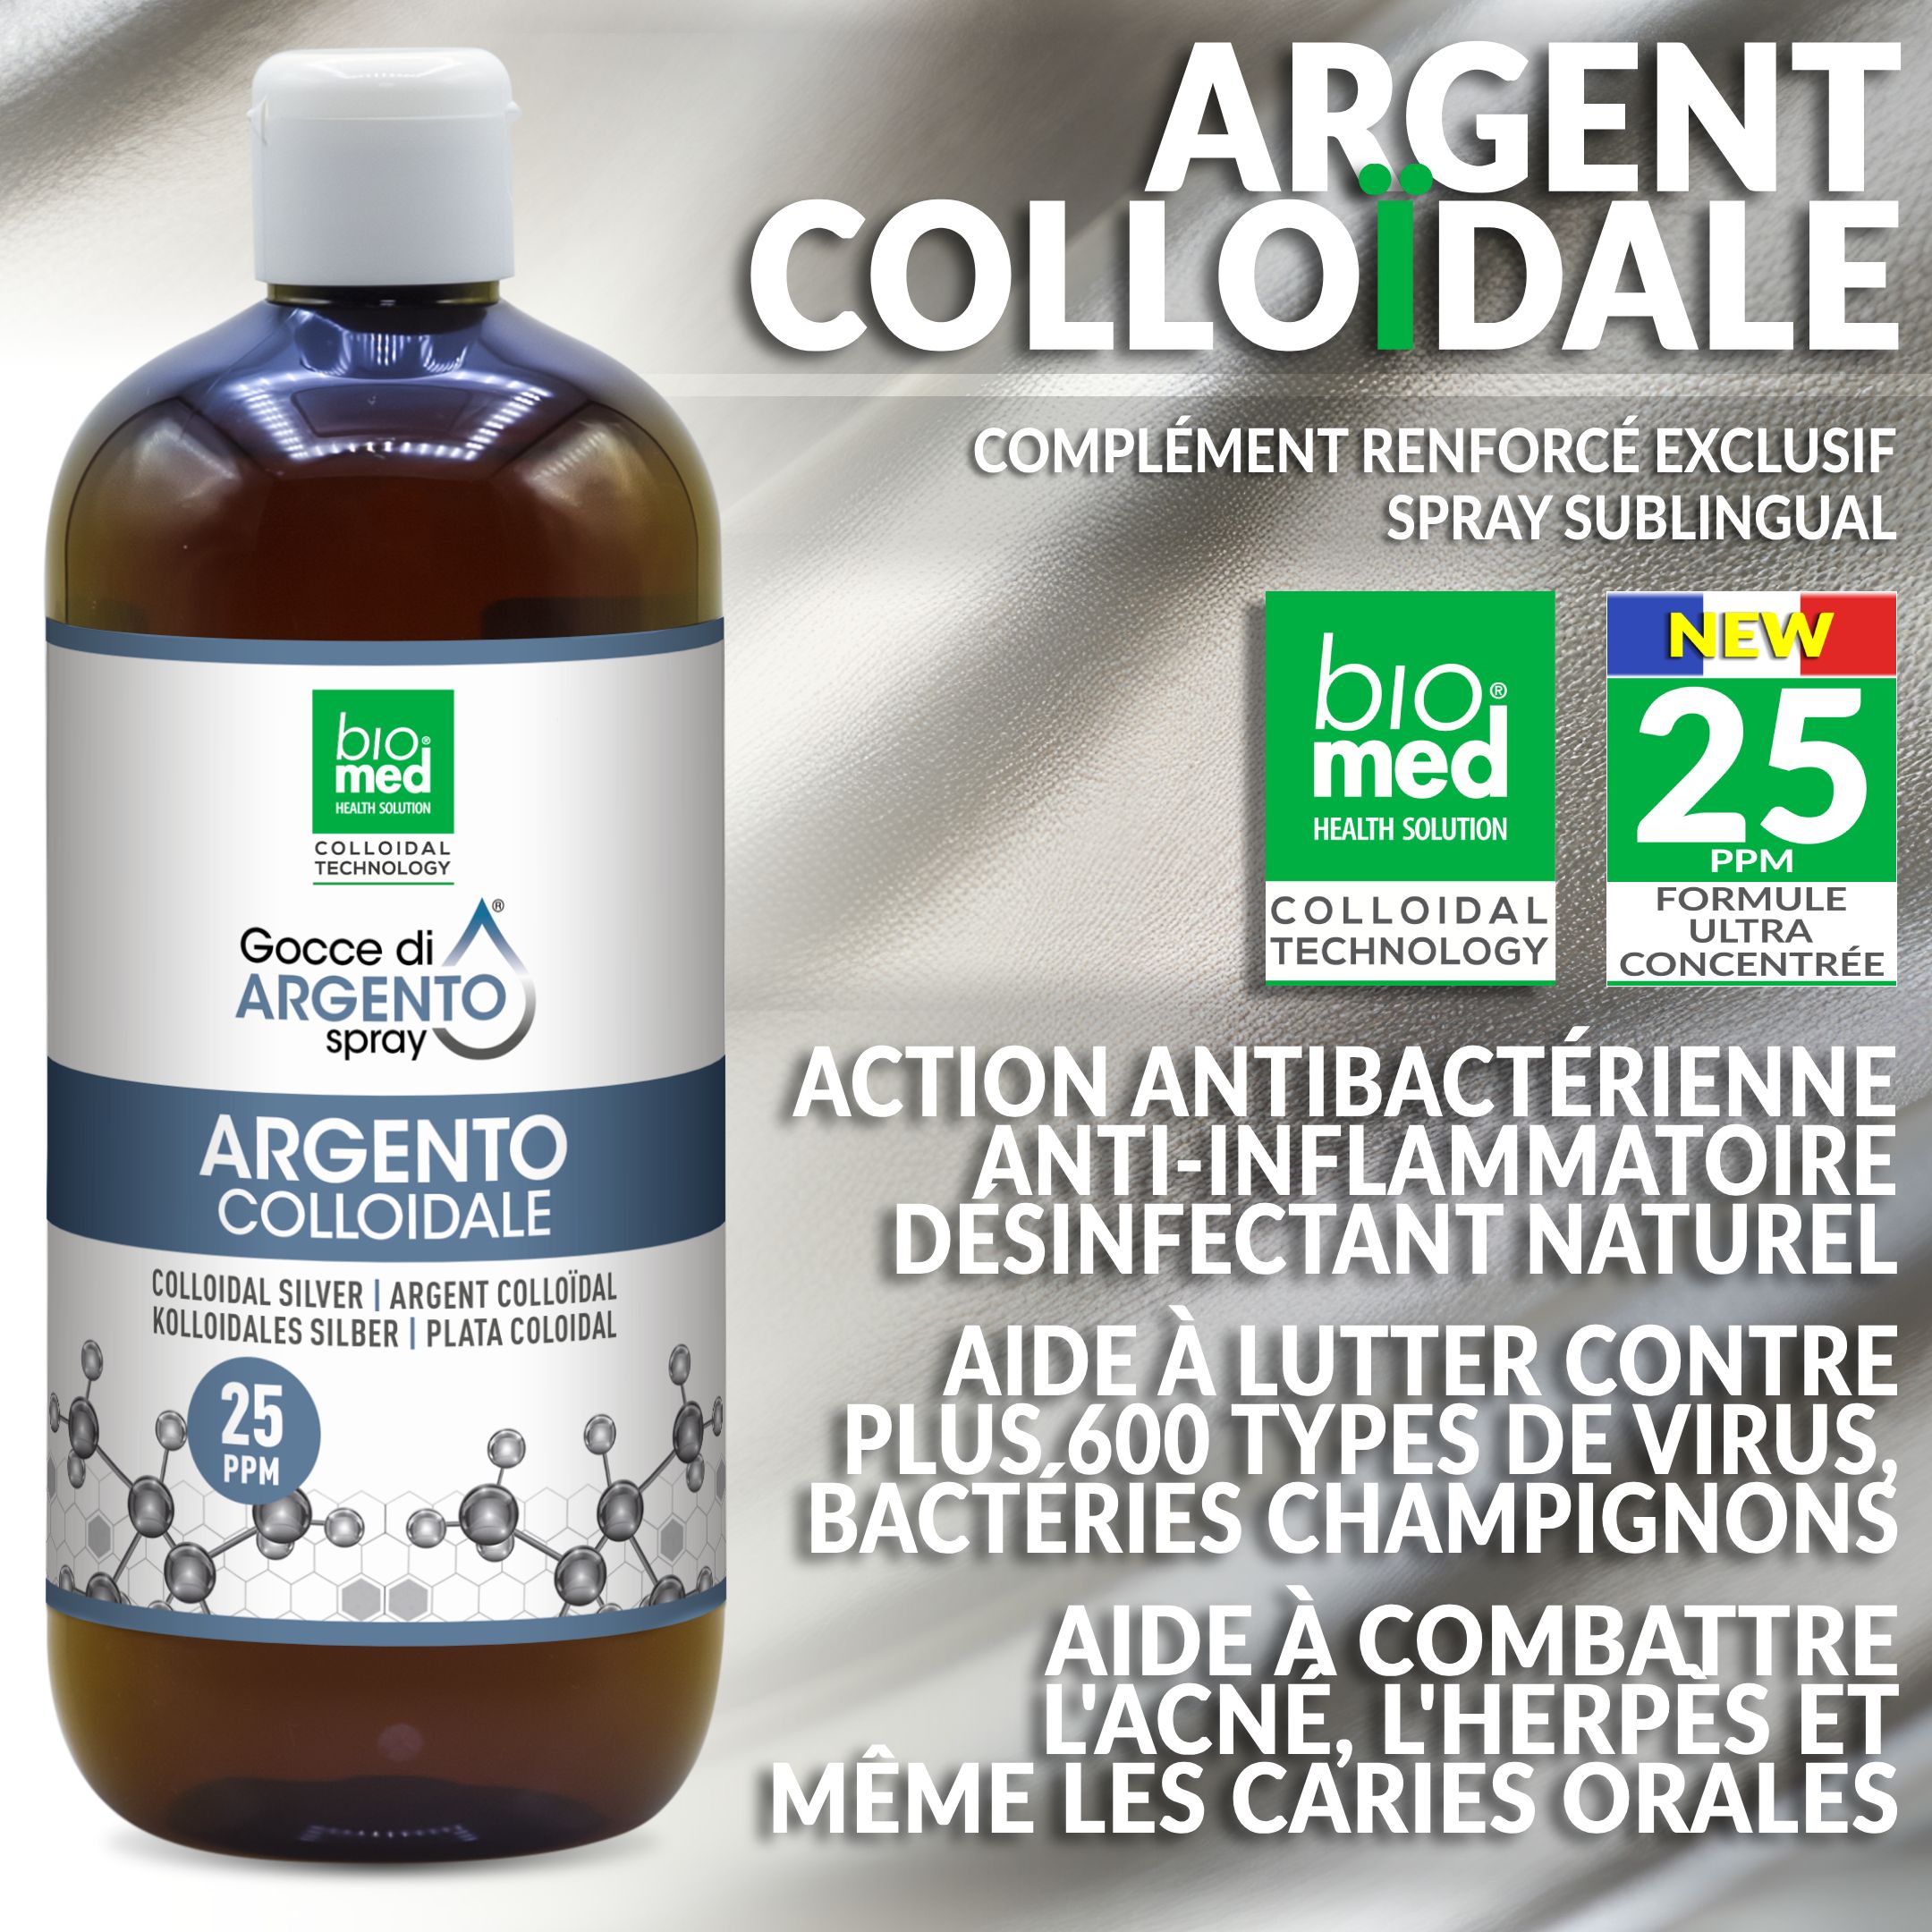 ARGENT COLLOÏDAL SPRAY SUBLINGUAL PUR - GOUTTES NANO BIOMED - 500 ML. - 25 PPM